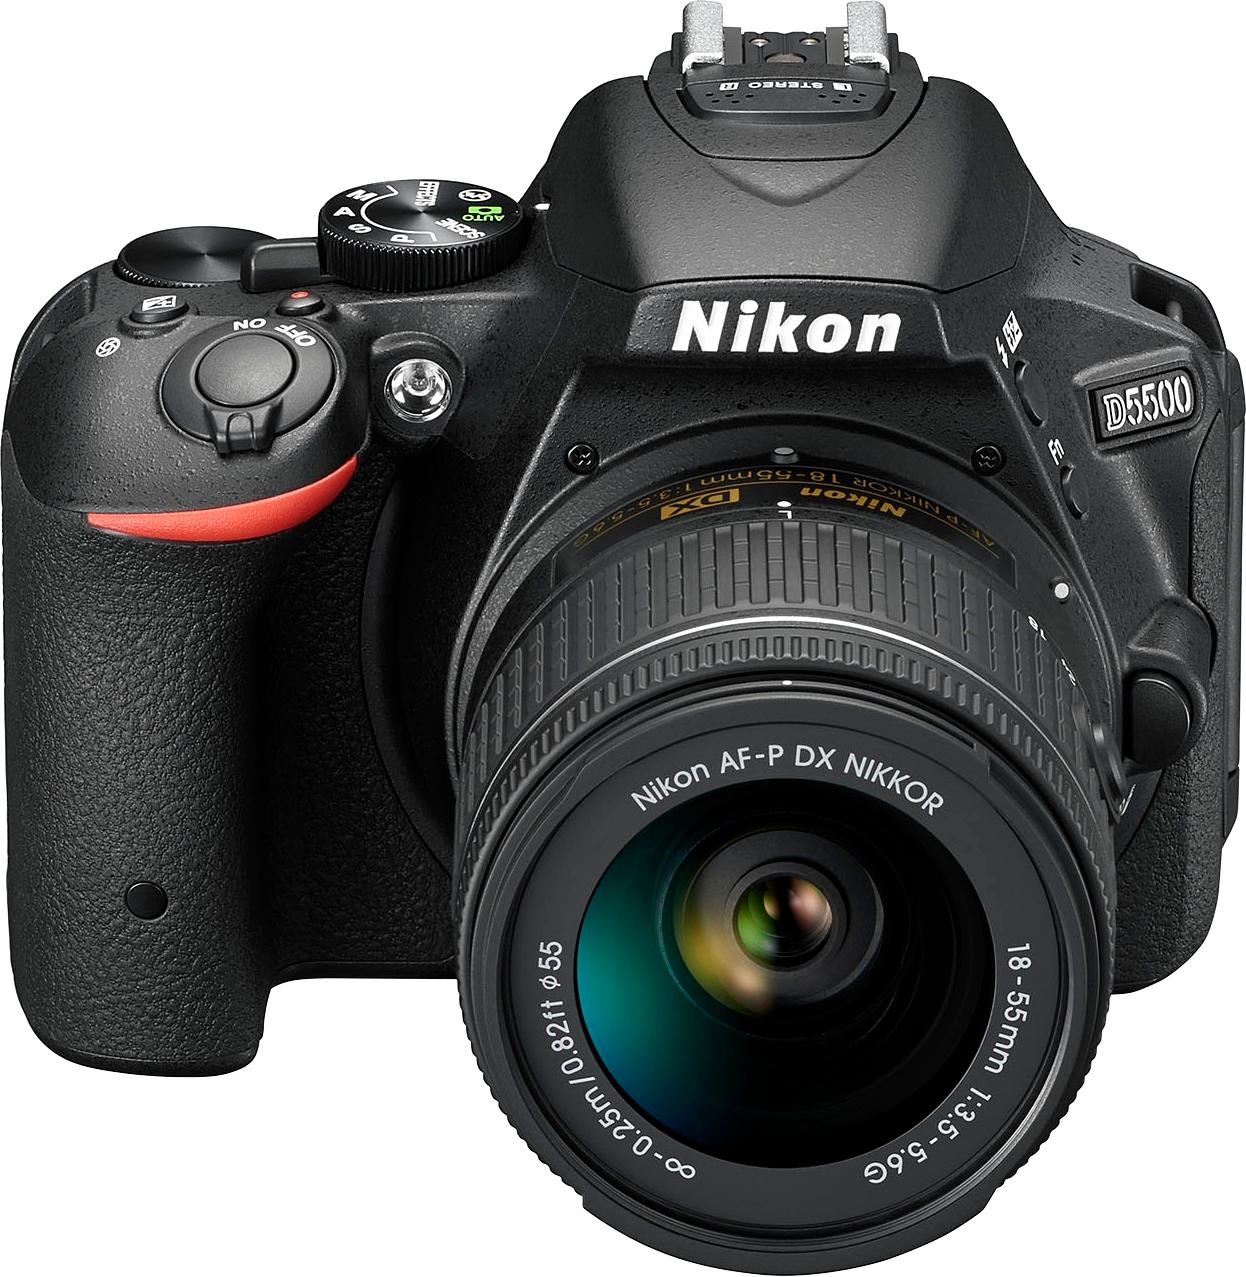 Best Buy: Nikon D5500 DSLR Camera with 18-55mm and 70-300mm Lenses